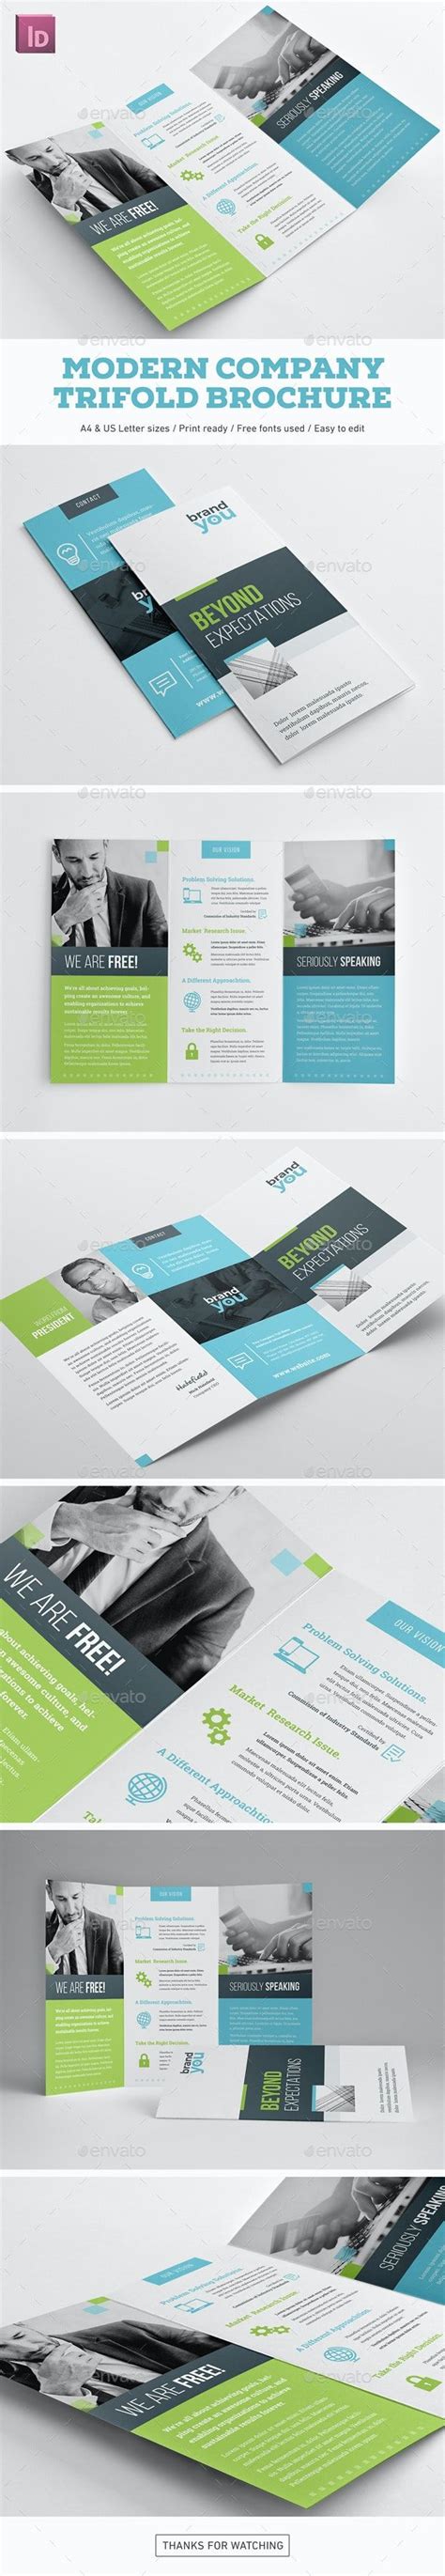 Modern Company Trifold Brochure In 2020 Trifold Brochure Trifold